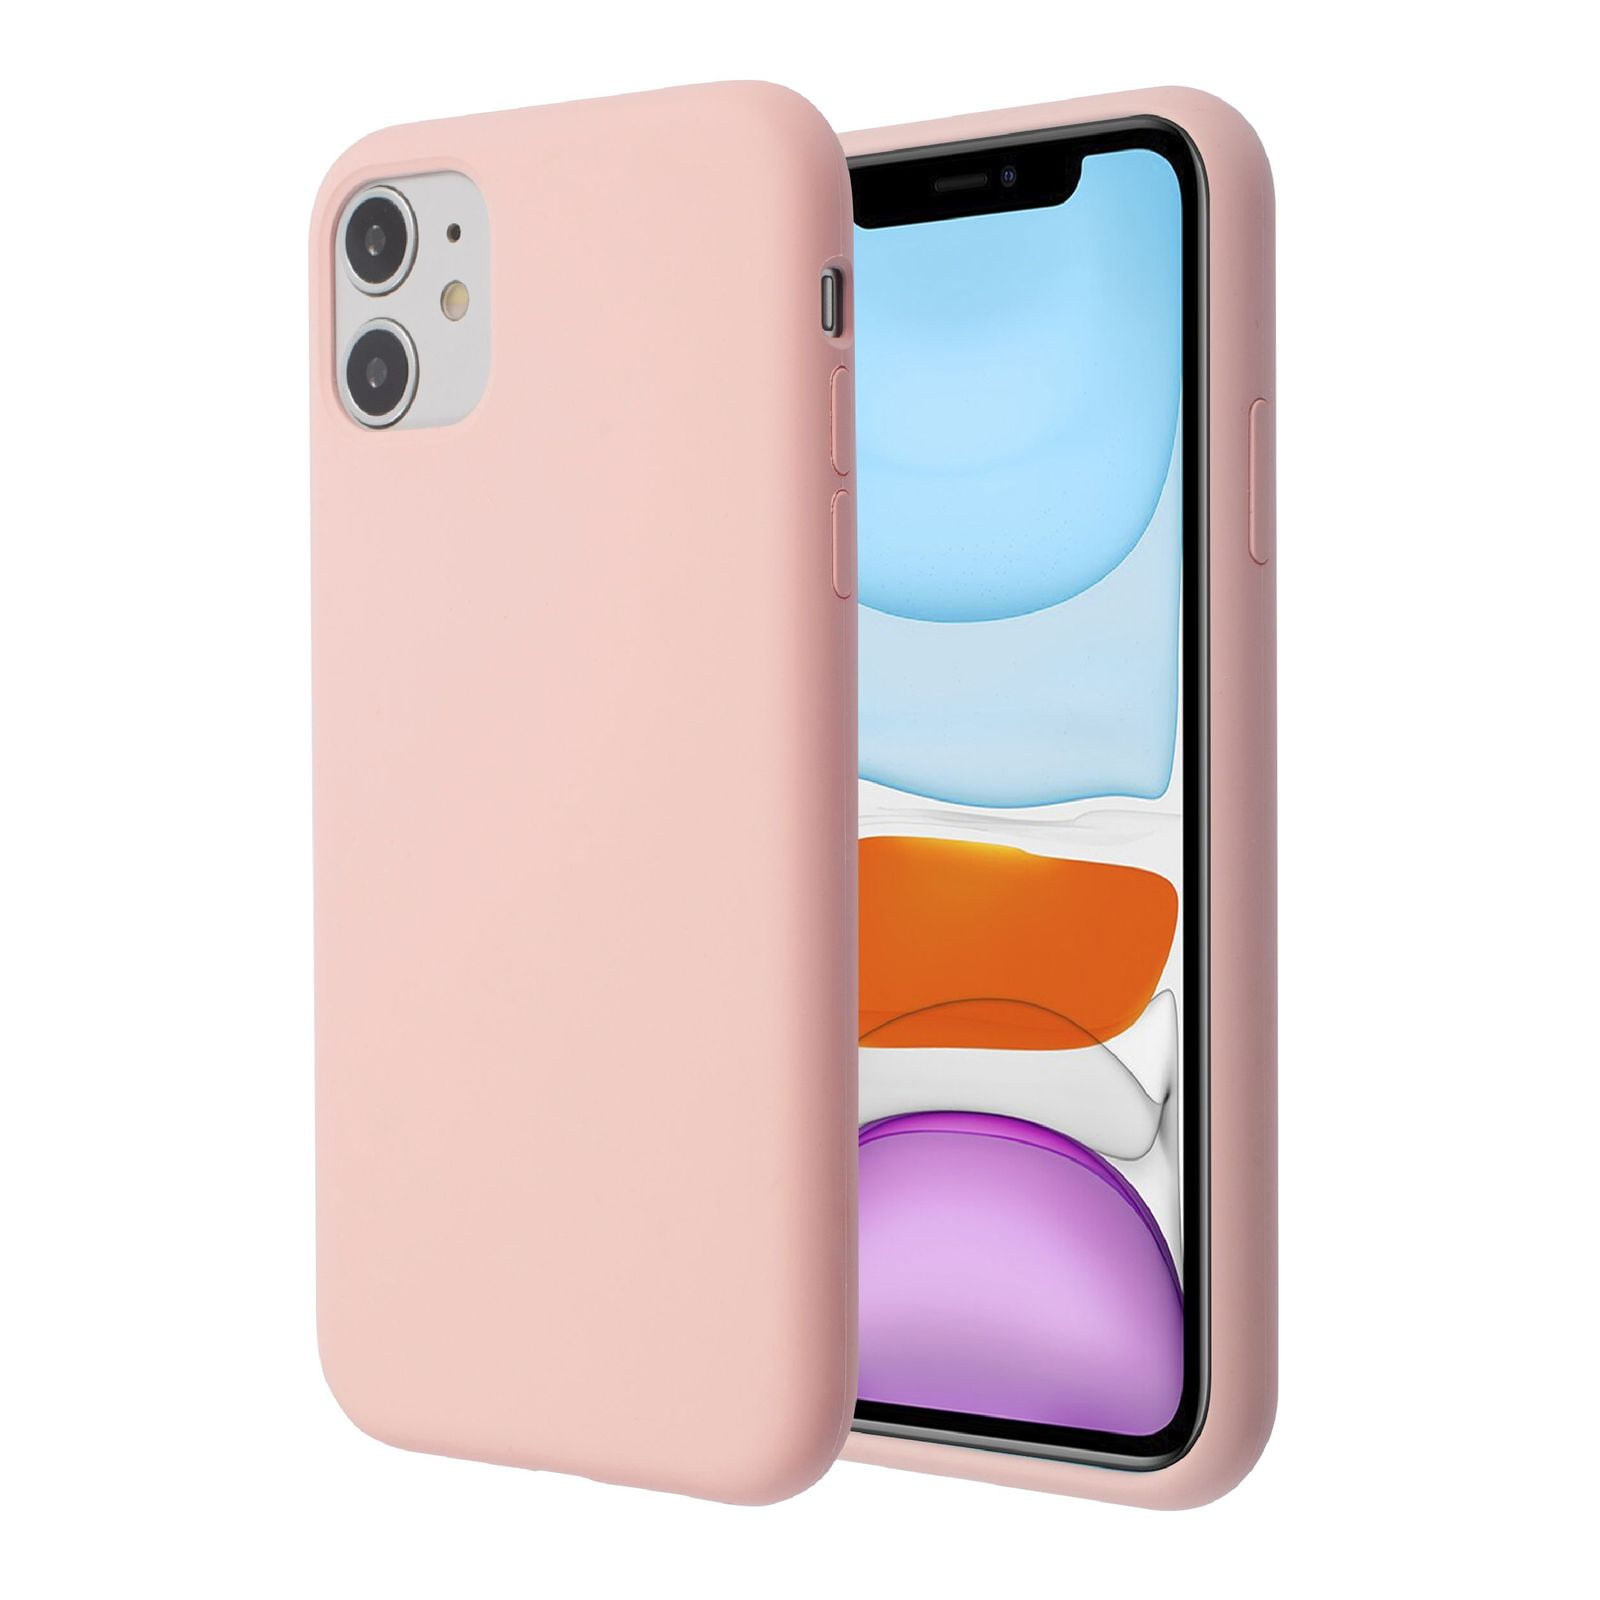 High Quality Soft Phone Case Liquid Silicone Cover Fiber Inside Silicon  Back Cover Case For Iphone 11 12 Case Fundas De Telefono - Buy Liquid  Silicone